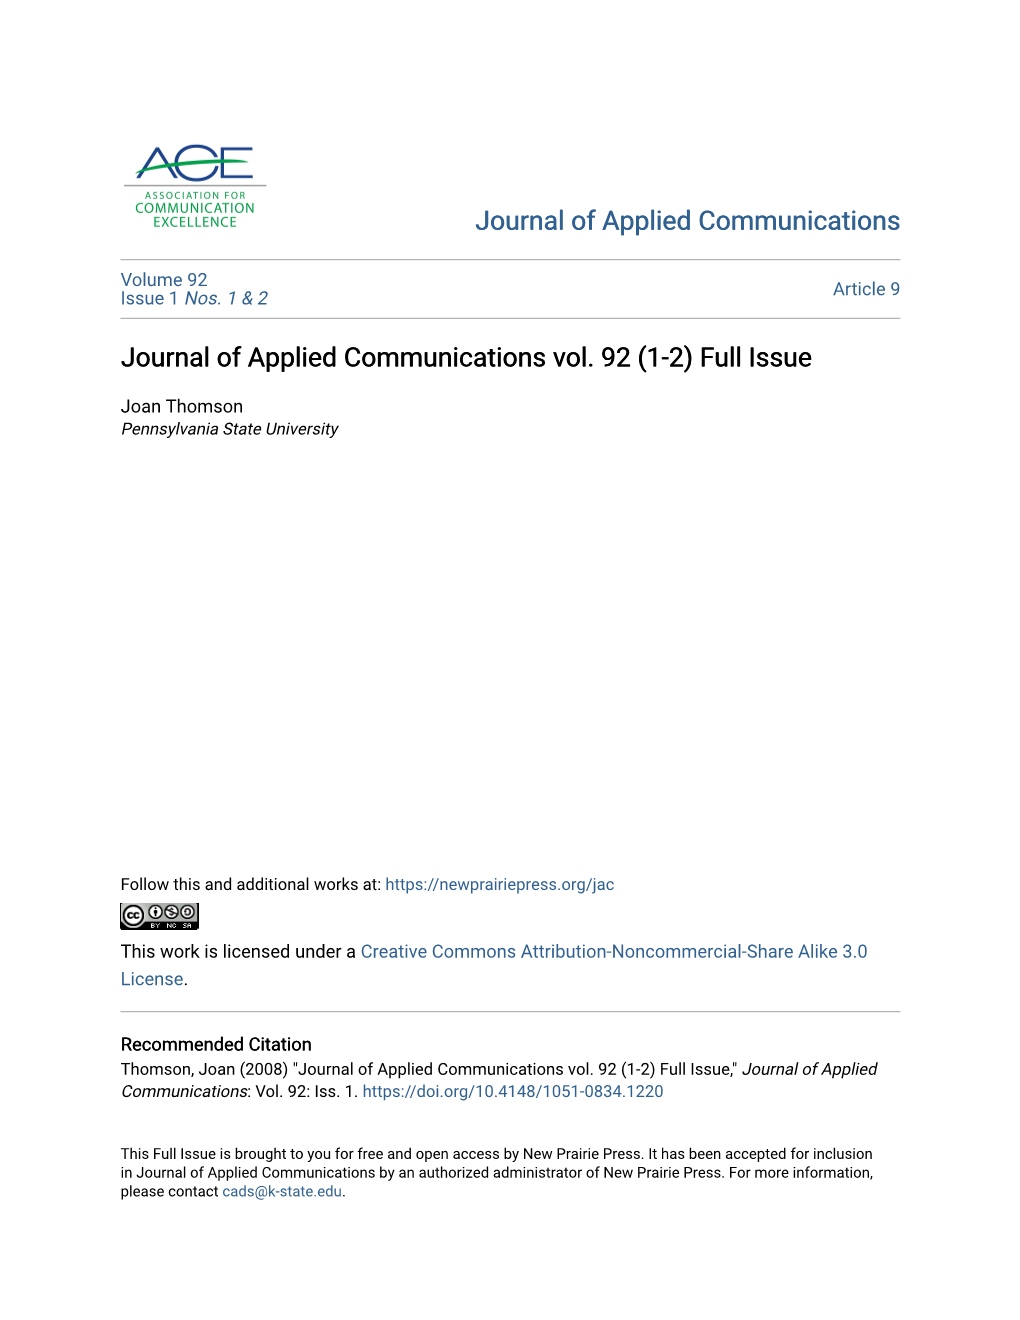 Journal of Applied Communications Vol. 92 (1-2) Full Issue